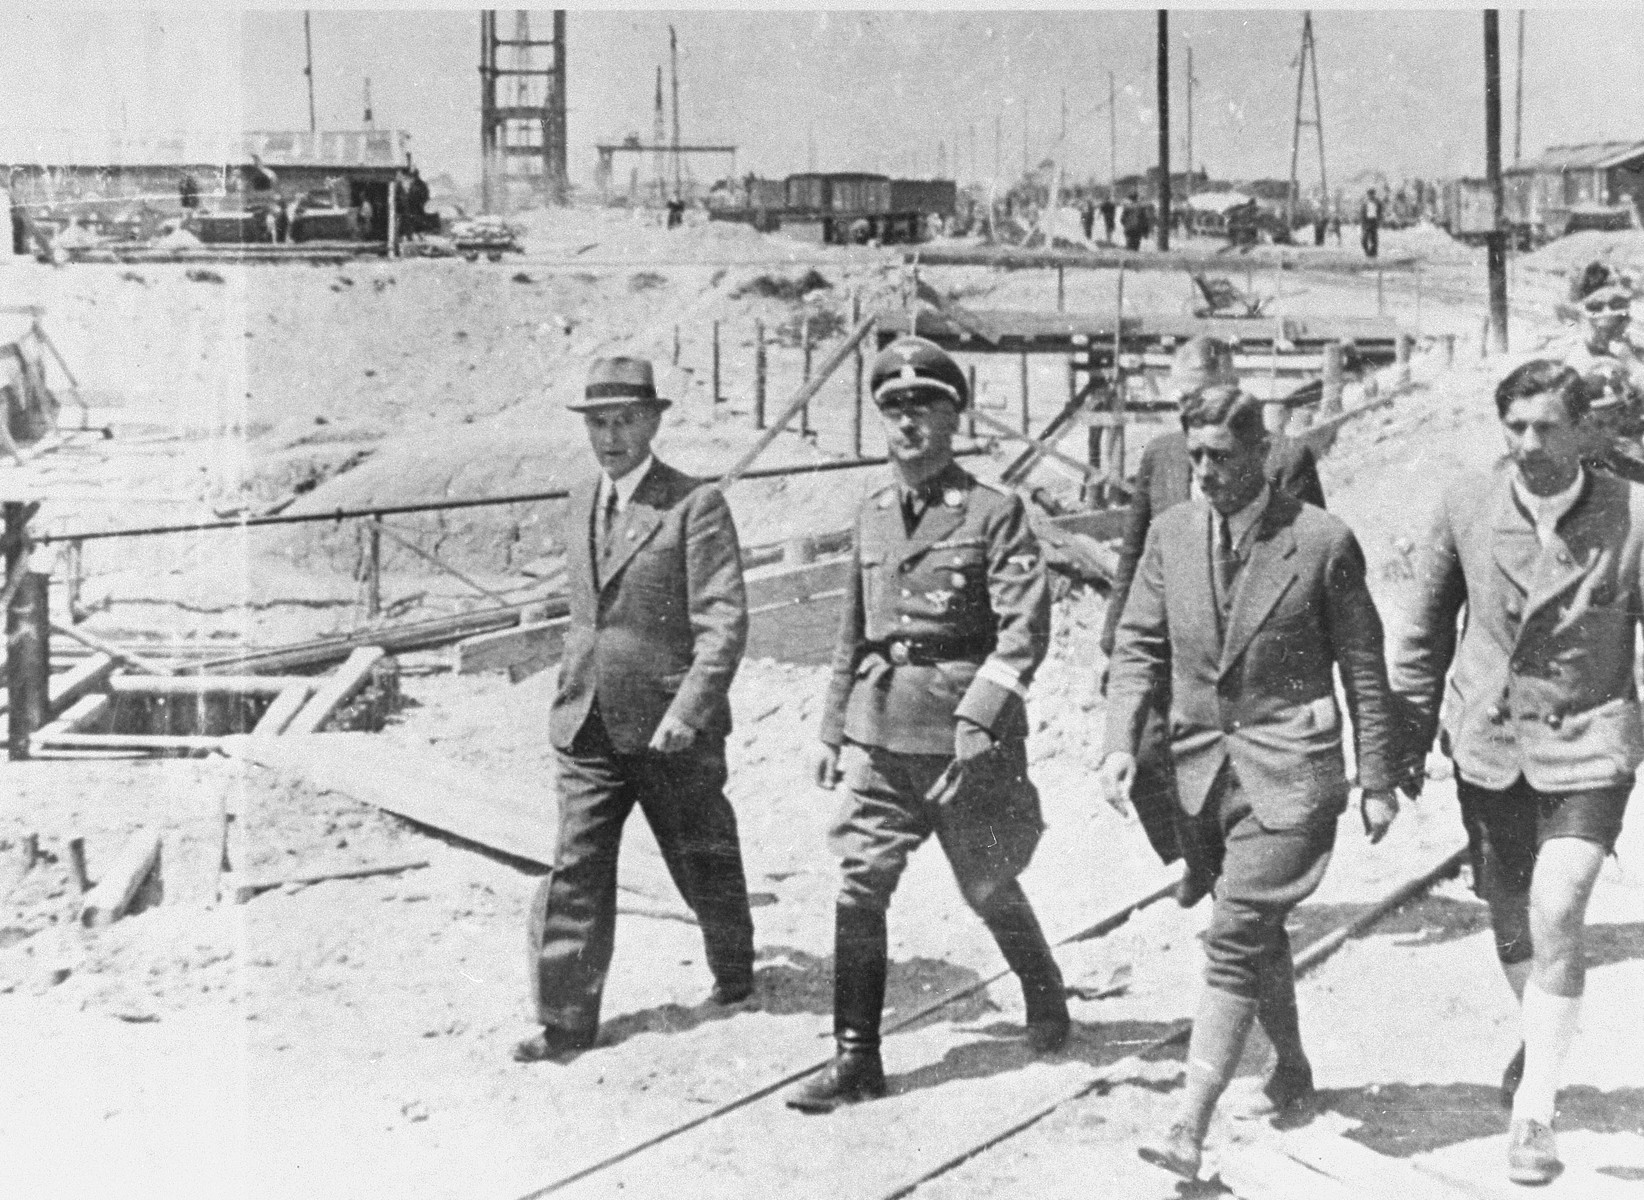 Reichsfuehrer SS Heinrich Himmler tours the Monowitz-Buna building site in the company of Max Faust (first on the left). 

Faust, who was an IG Farben engineer, was the head of building operations at Monowitz-Buna.